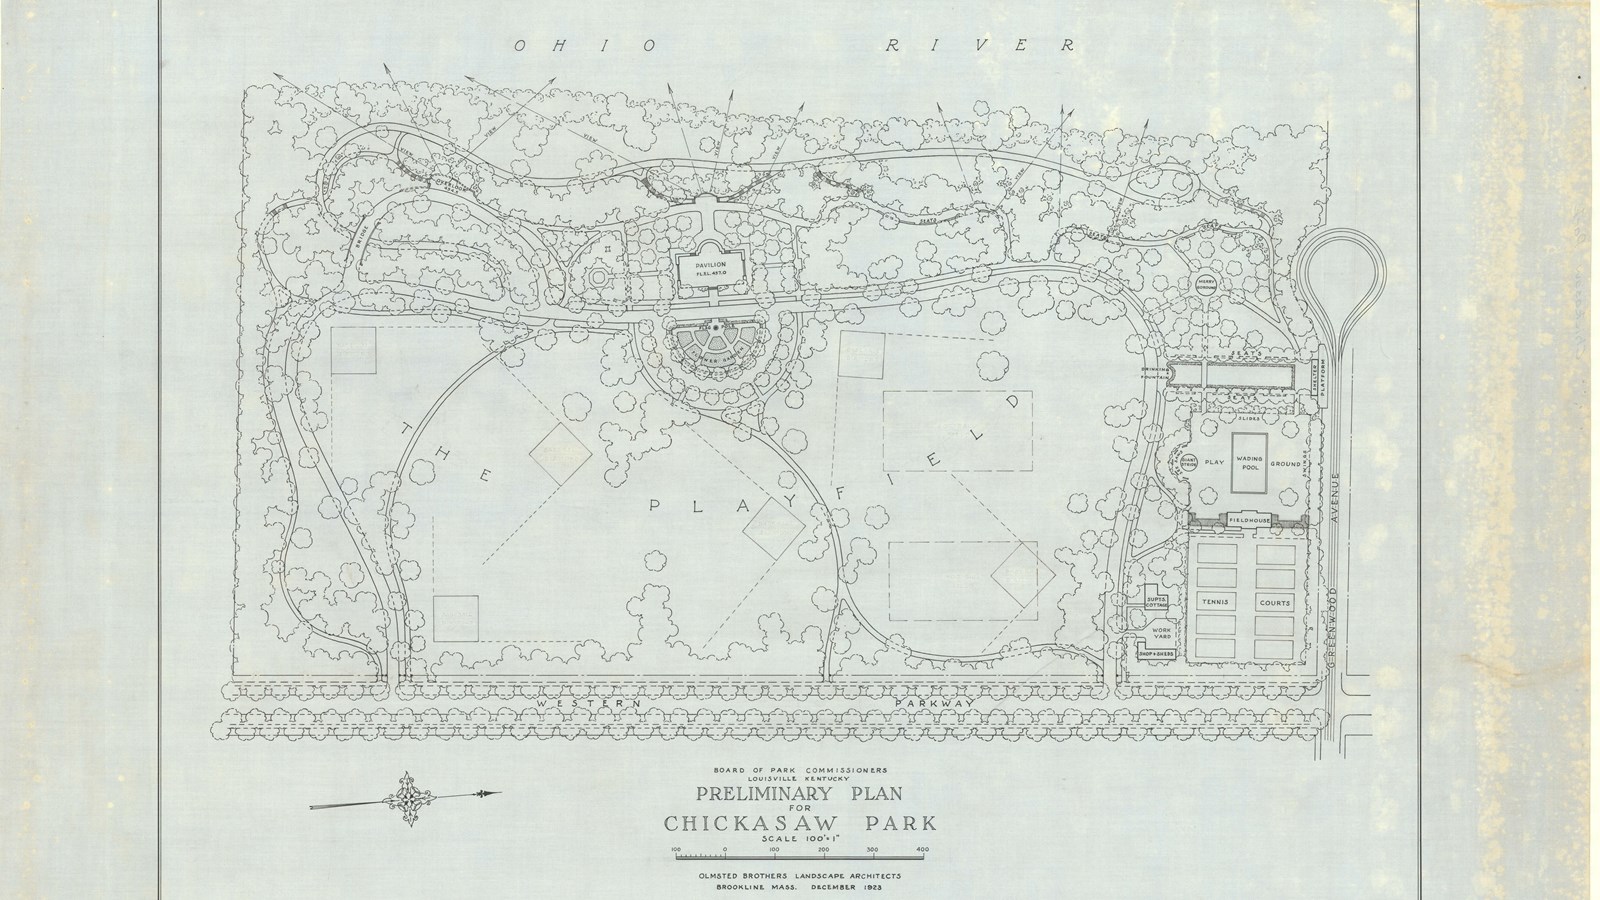 Pencil drawing of rectangular park with buildings, open playfield, tree lined paths